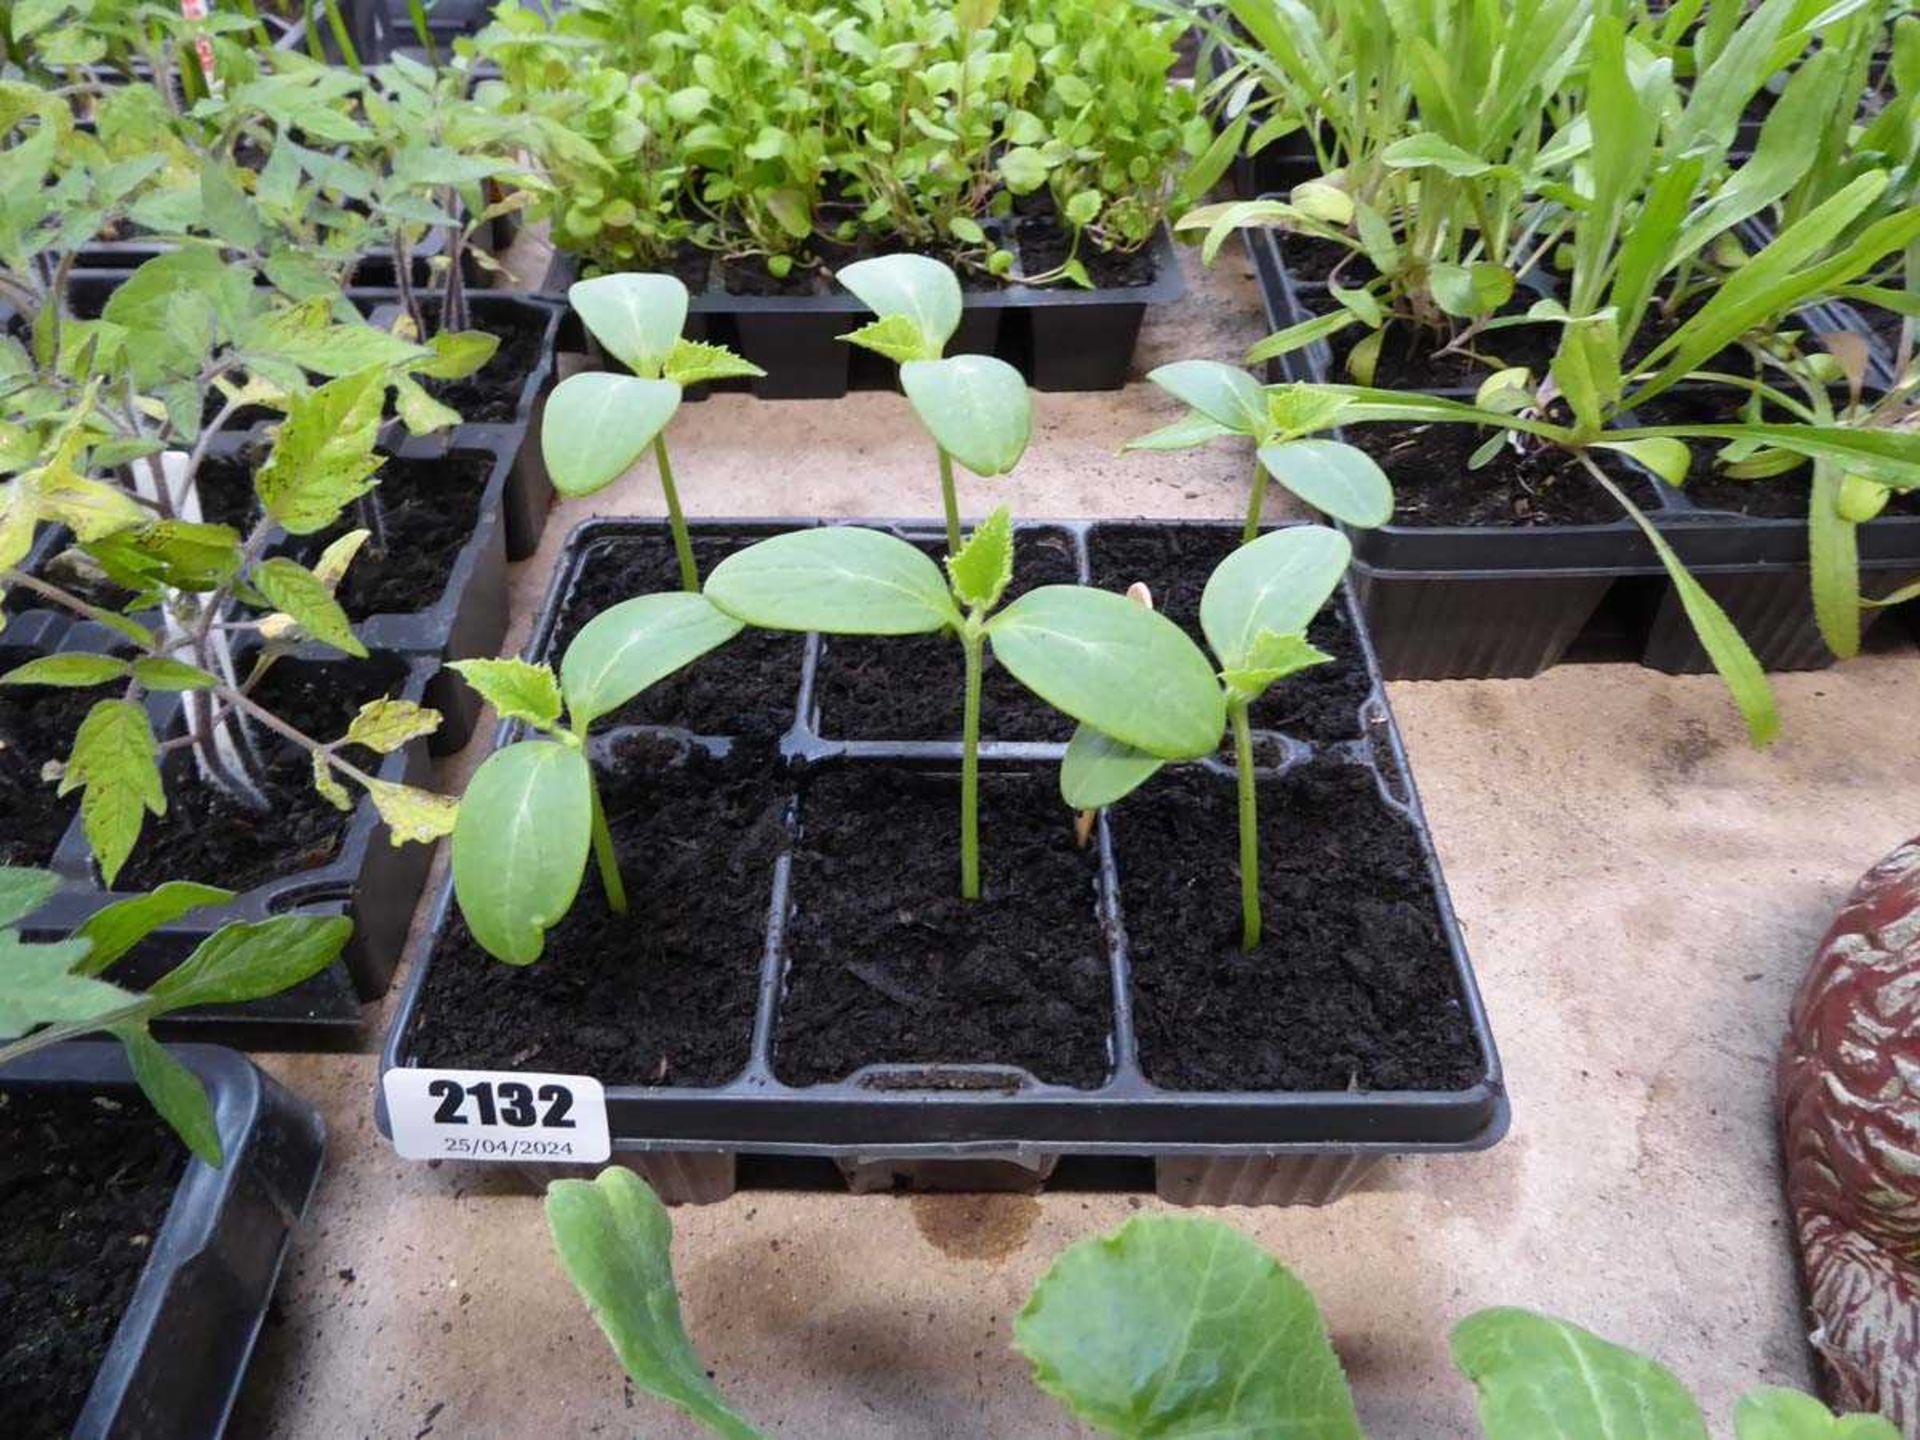 Tray containing 6 cucumber plants